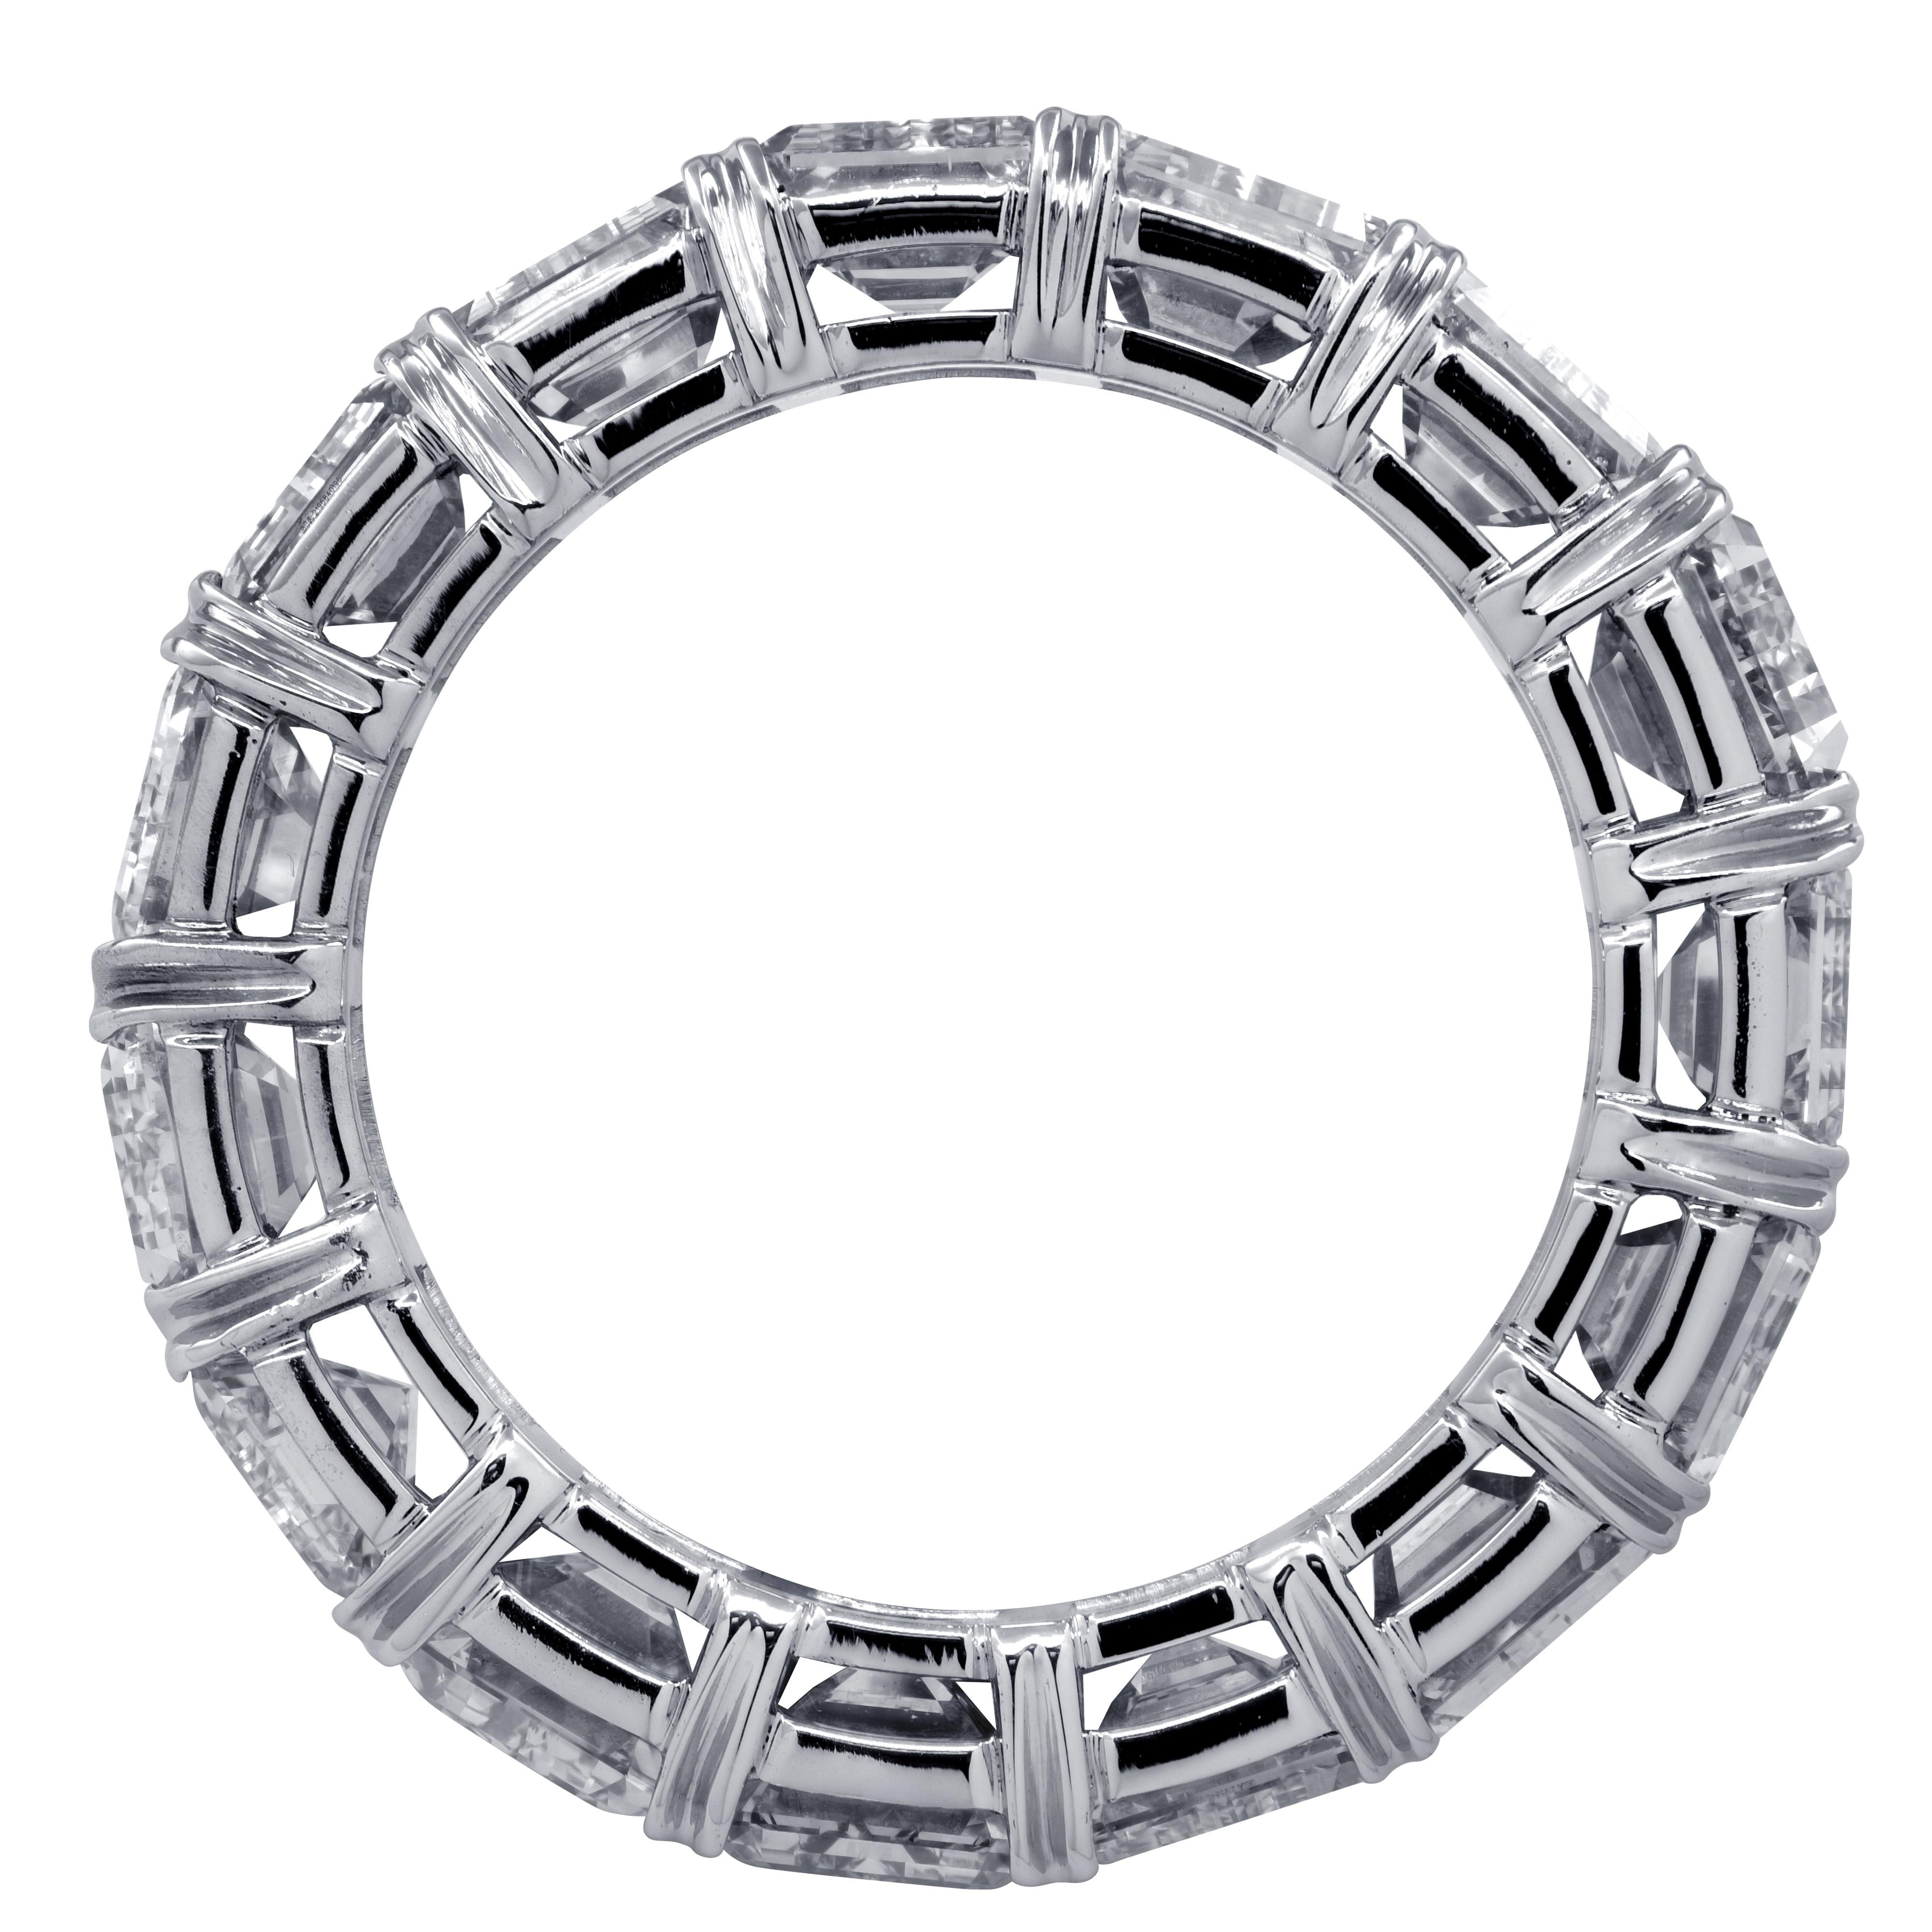 Exquisite Vivid Diamonds eternity band crafted by hand in Platinum, showcasing 16 stunning emerald cut diamonds weighing 16.24 carats total, H-I color, VS-SI clarity. Each diamond is carefully selected, perfectly matched and set in a seamless sea of